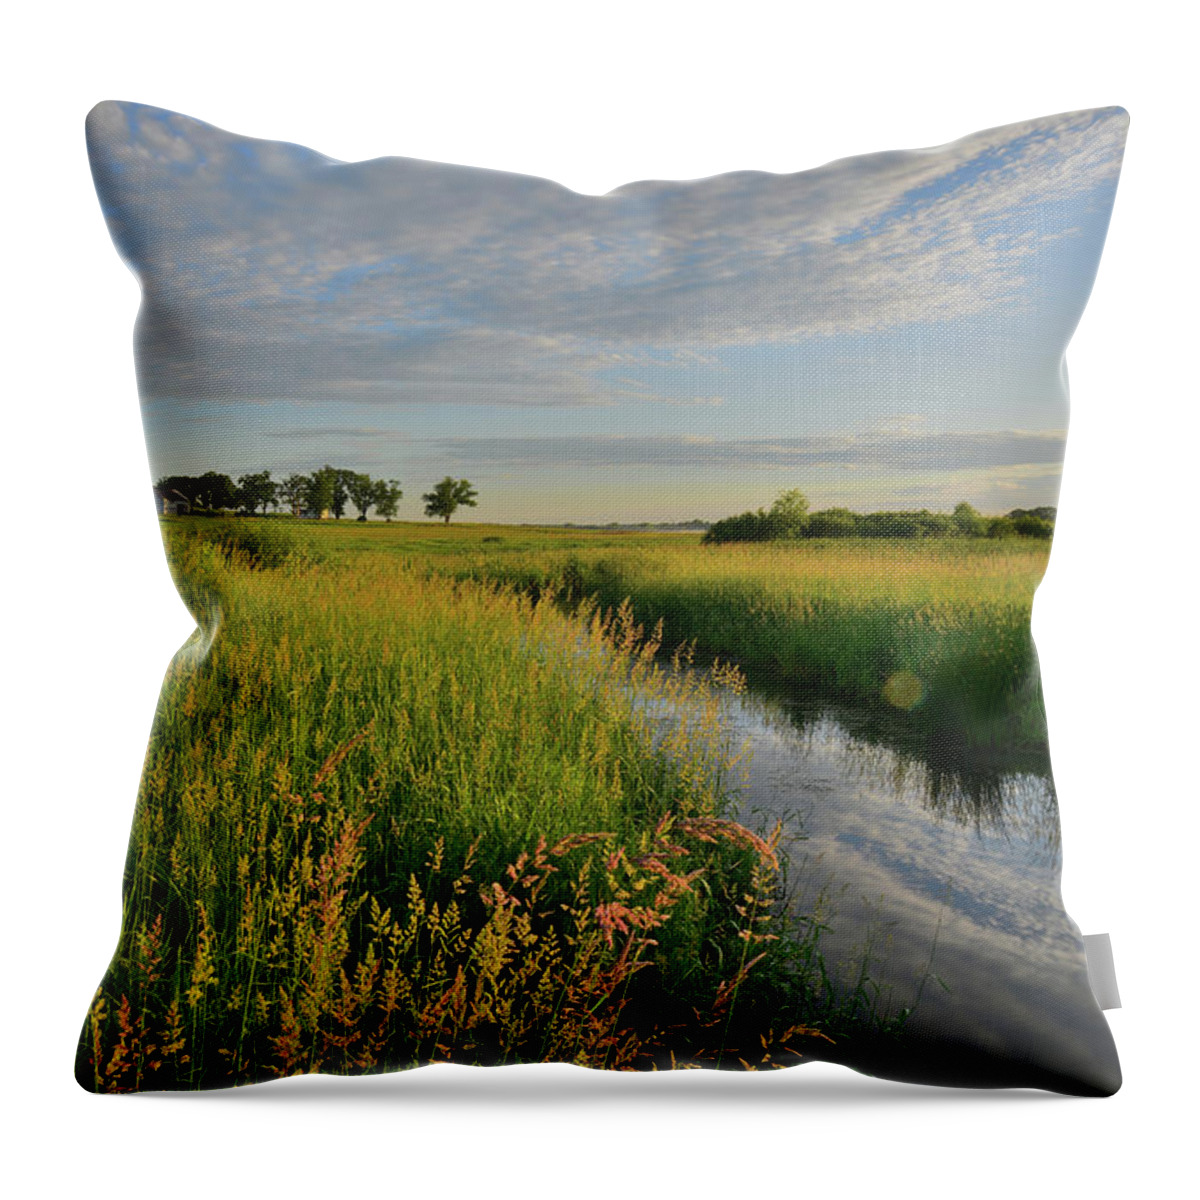 Glacial Park Throw Pillow featuring the photograph Morning Comes to Glacial Park by Ray Mathis